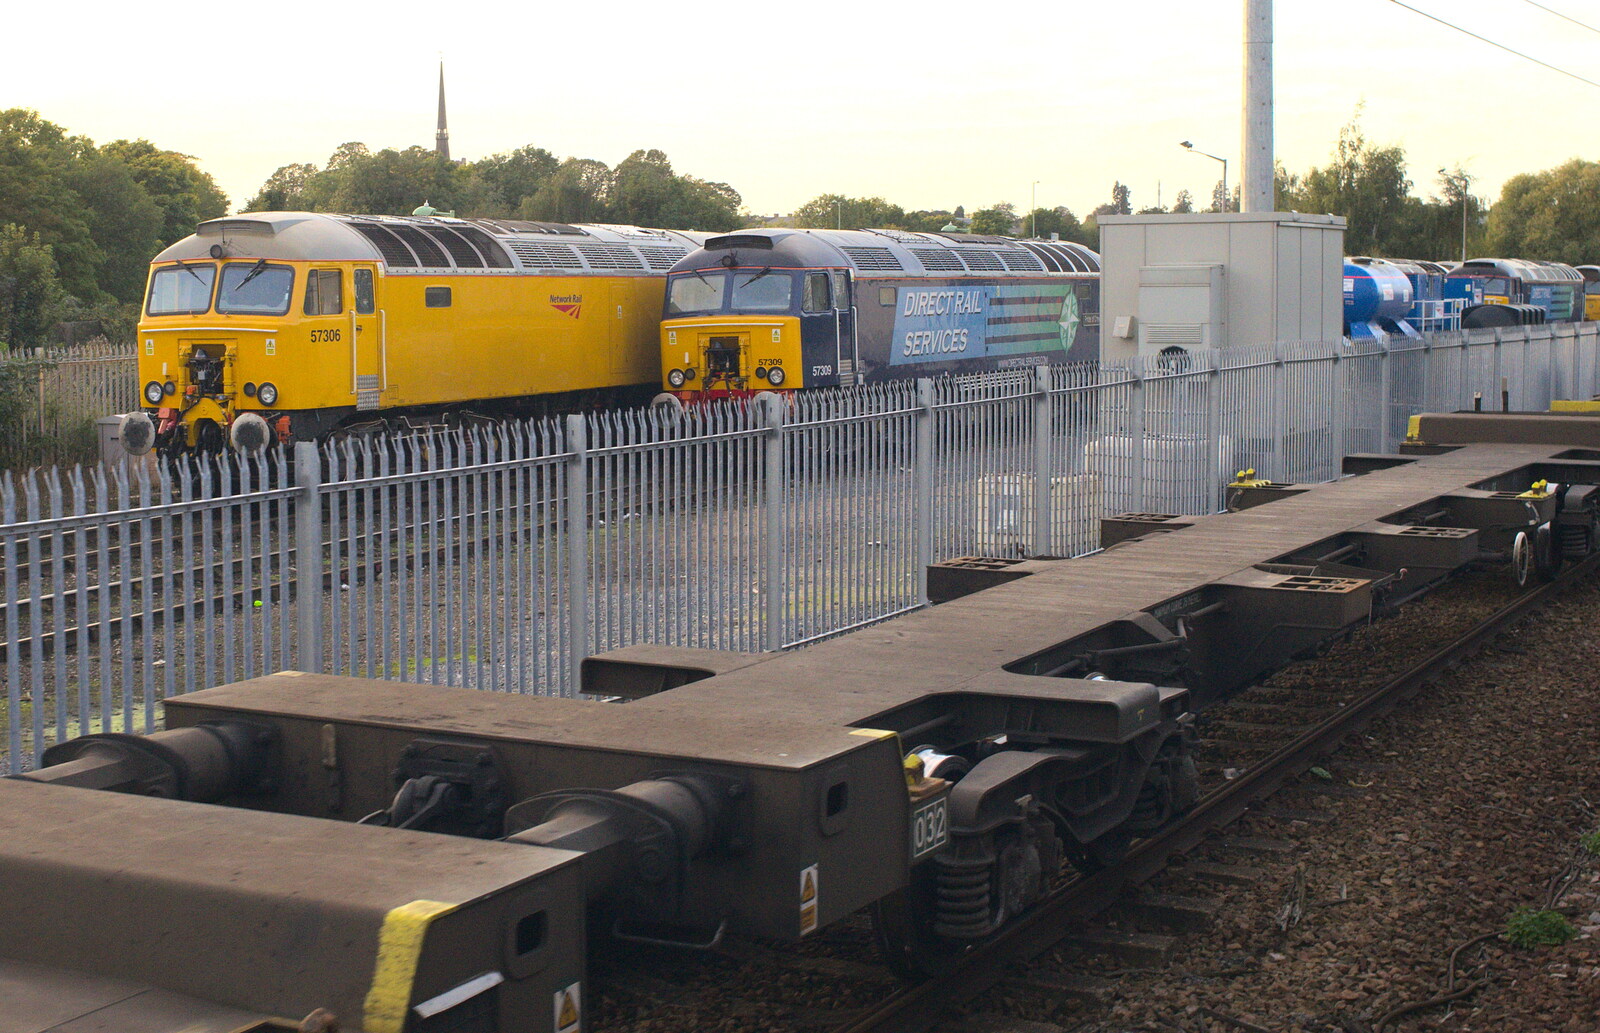 A collection of Class 57 locos at Stowmarket from Spider Webs, and 70000 Britannia at Liverpool Street, Brome and London - 10th October 2012